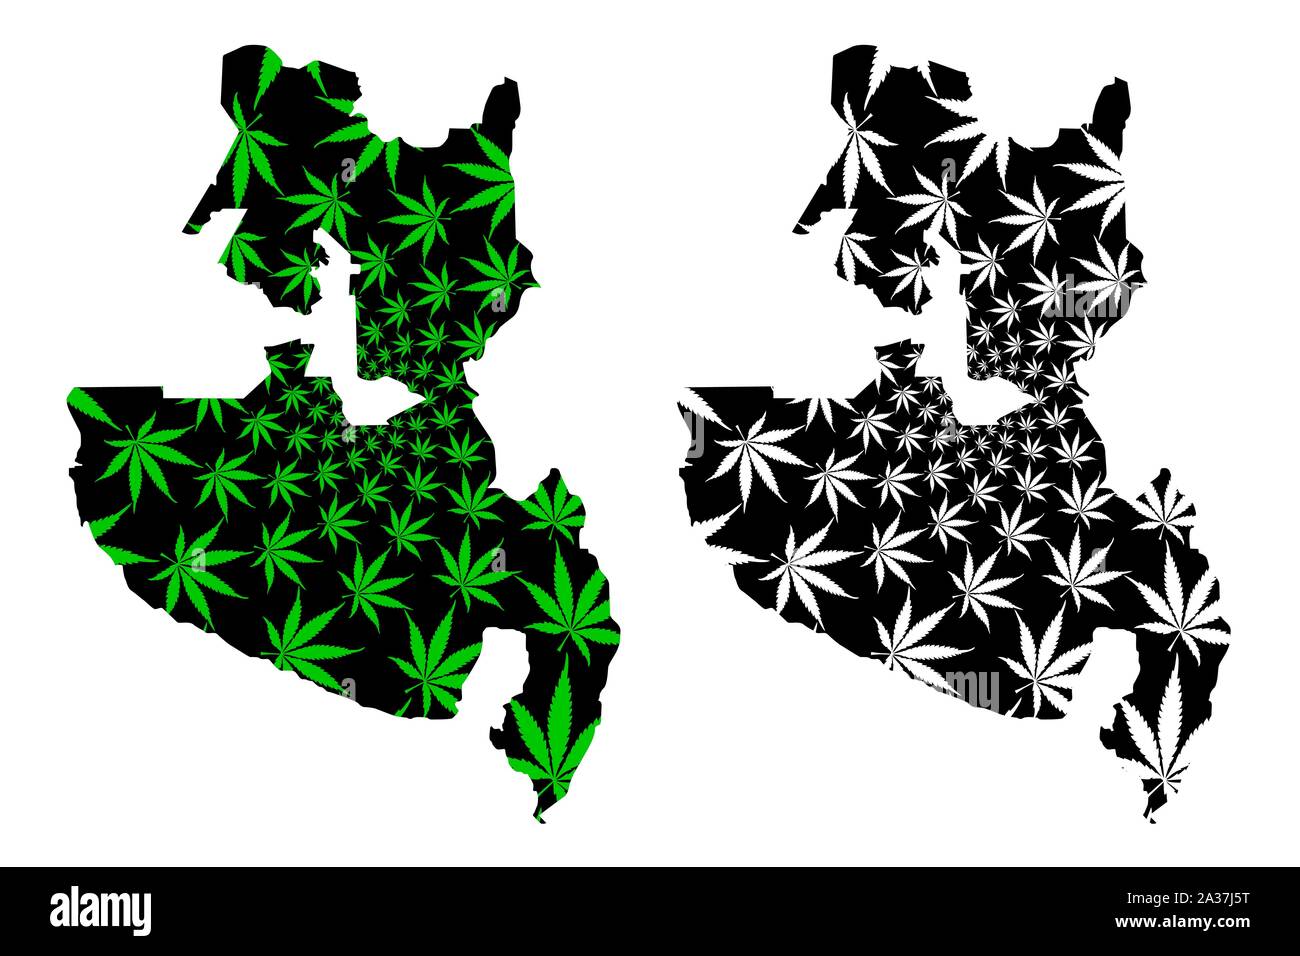 Soccsksargen Region (Regions and provinces of the Philippines) map is designed cannabis leaf green and black, Central Mindanao (Region XII) map made o Stock Vector